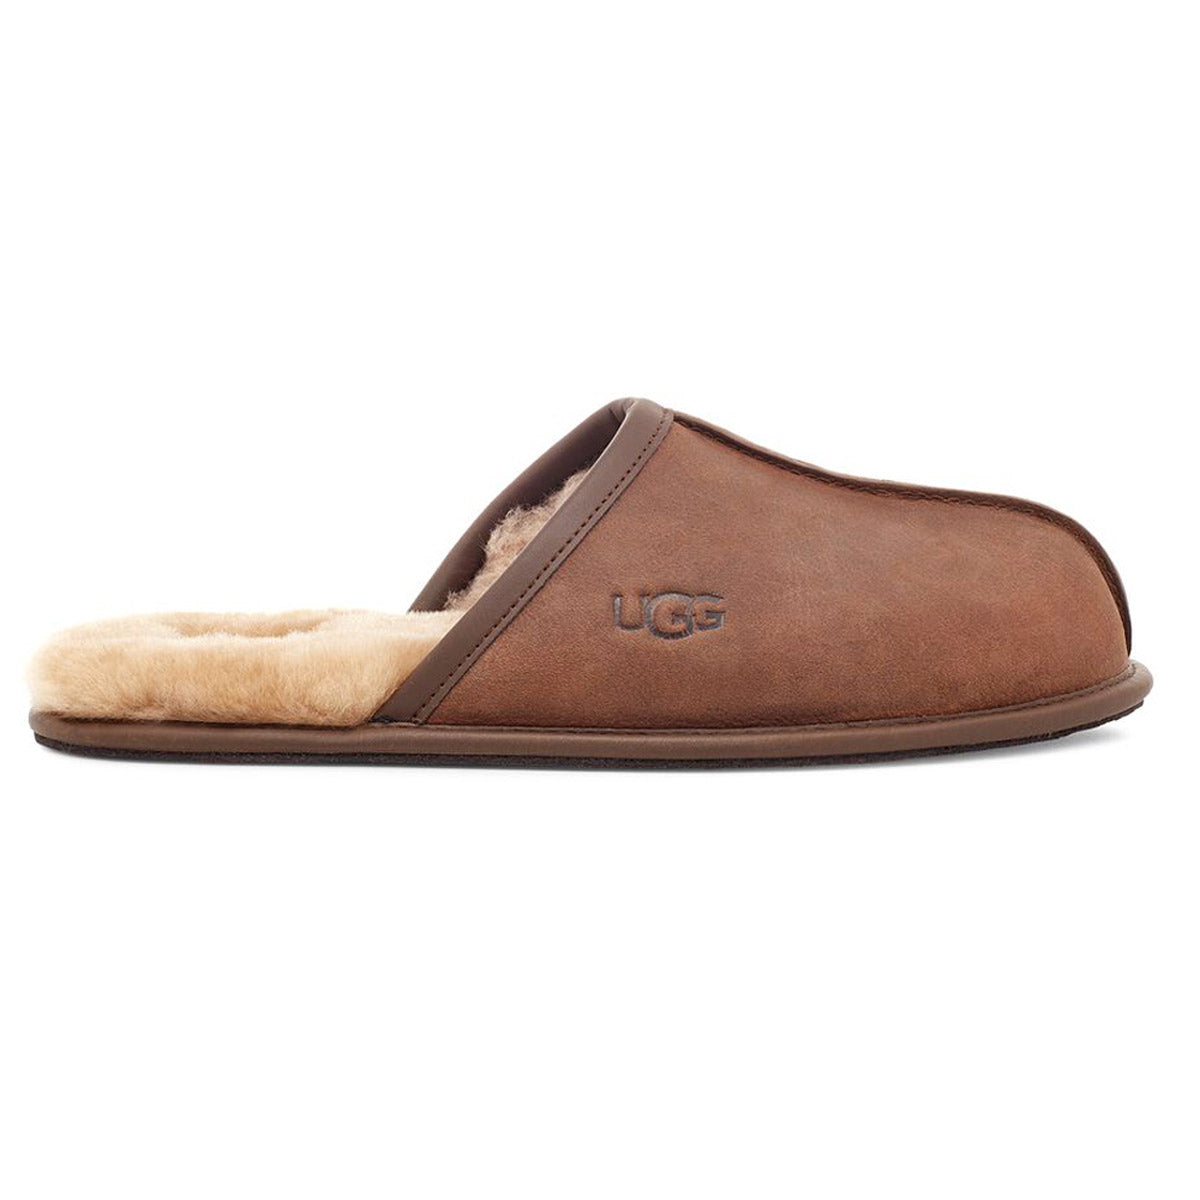 Side view of a single brown UGG SCUFF LEATHER slipper with a shearling lining.